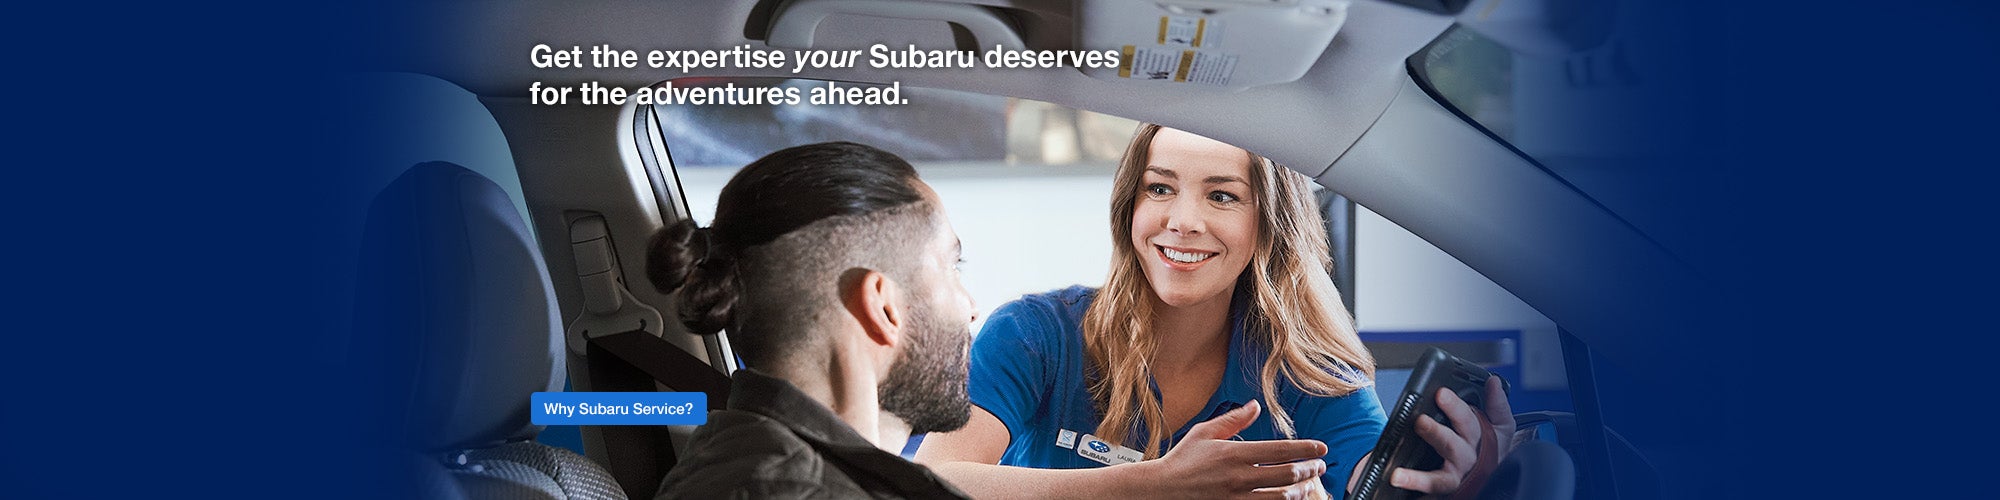 Get the expertise your Subaru deserves for the adventures ahead.